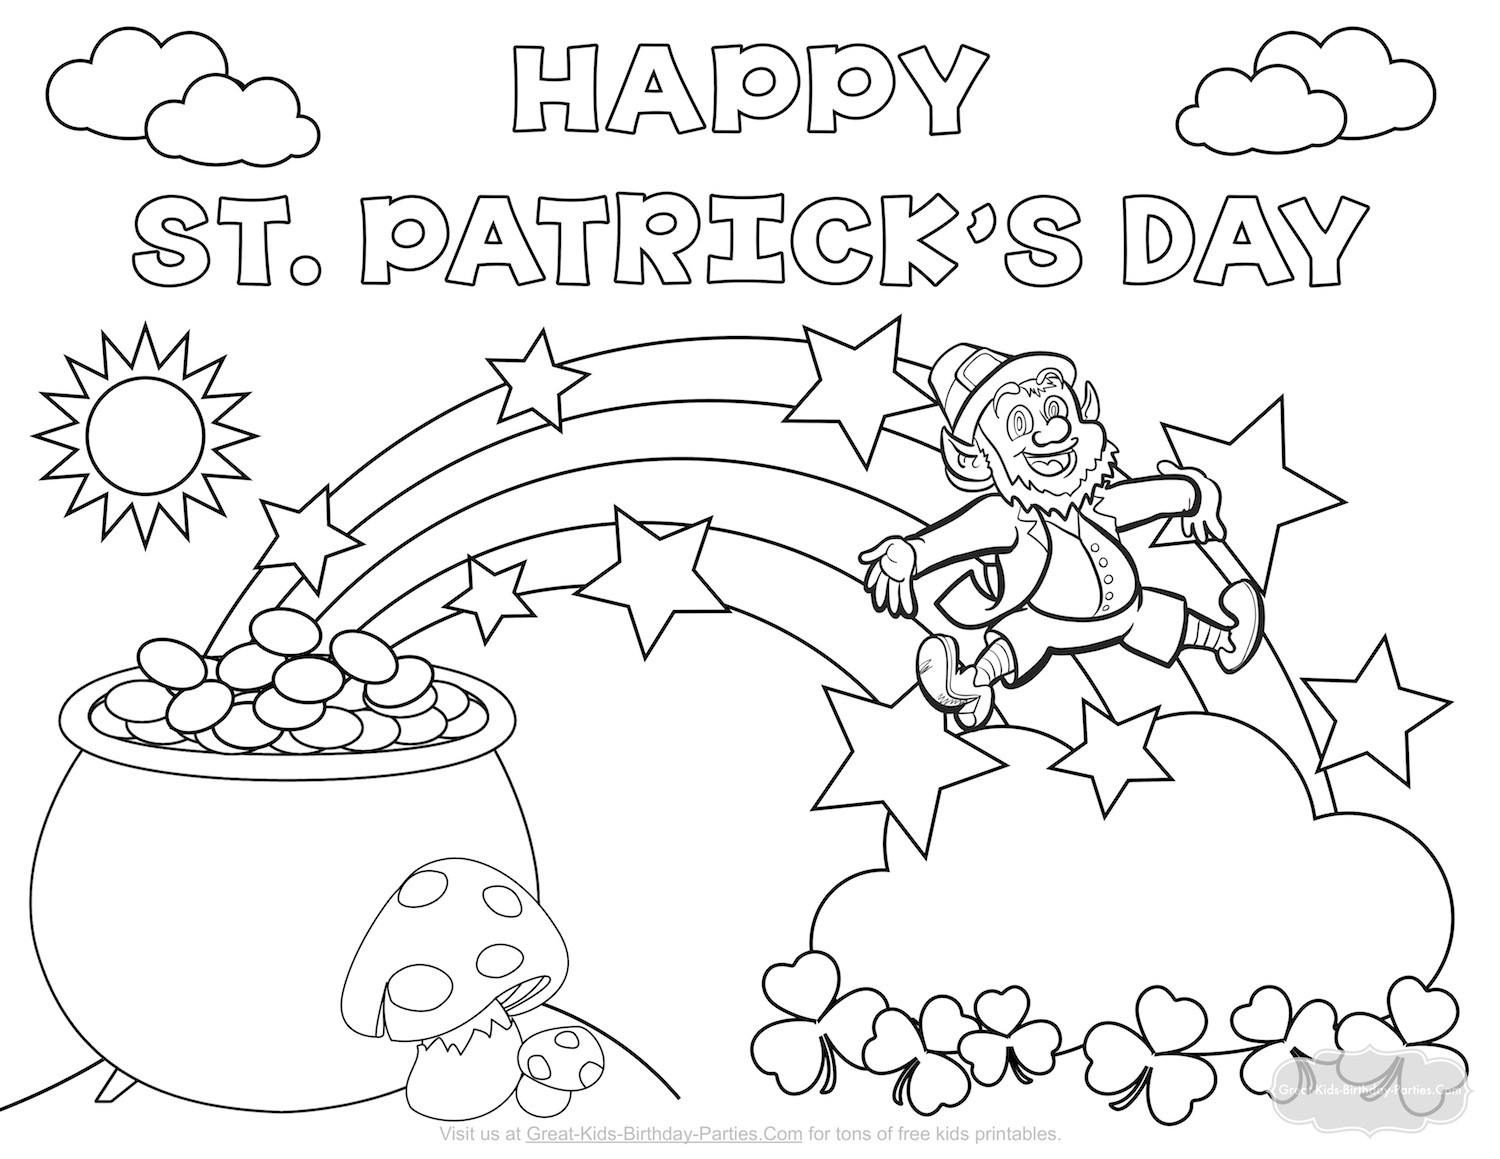 Saint Patrick S Day Coloring Pages - Coloring Pages For Kids St - Free Printable Saint Patrick Coloring Pages